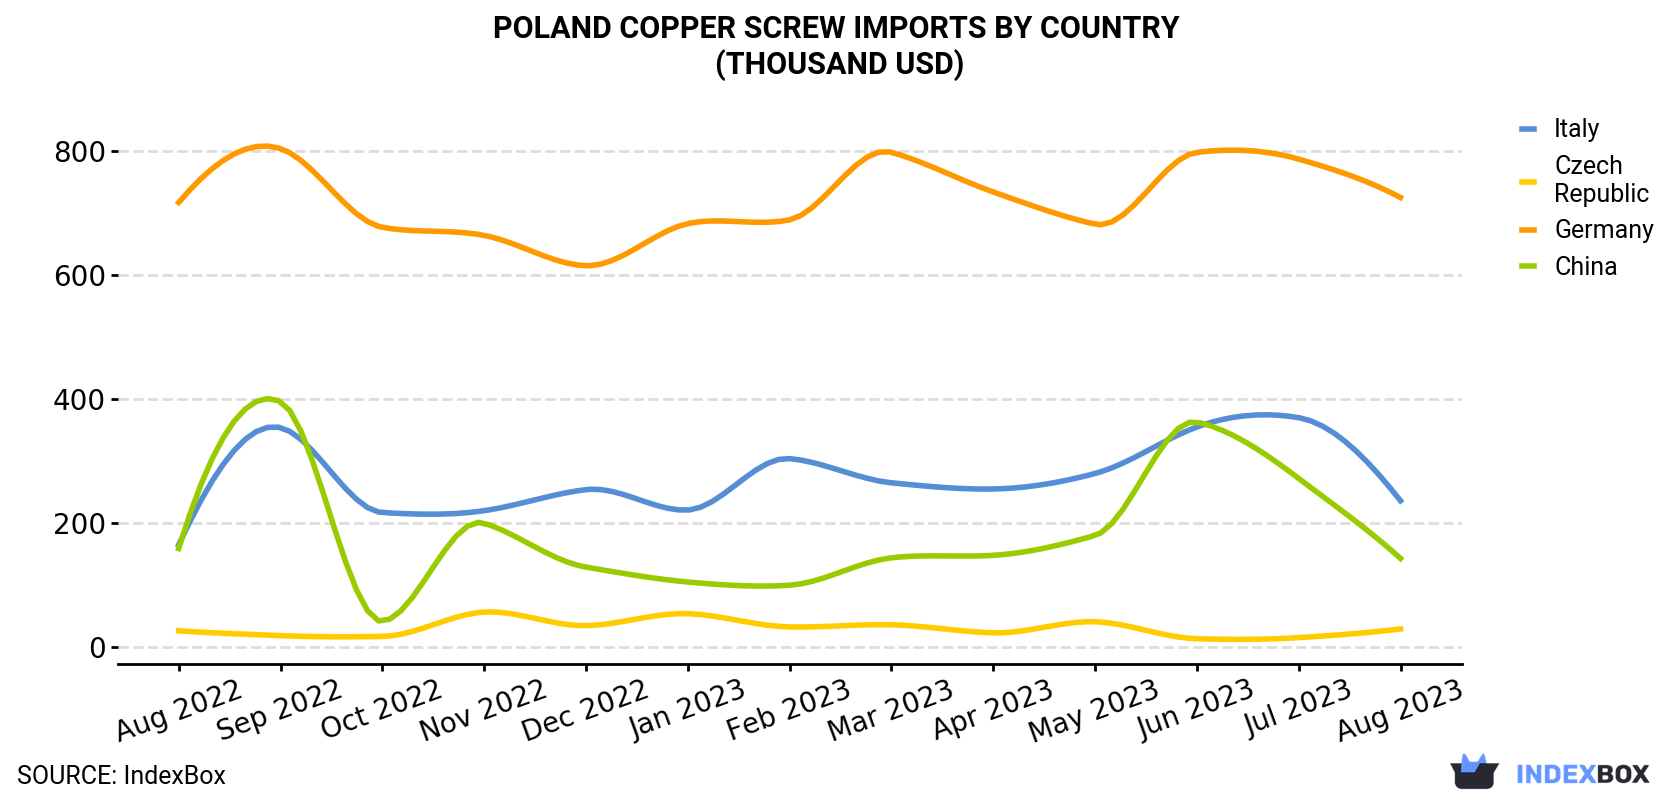 Poland Copper Screw Imports By Country (Thousand USD)